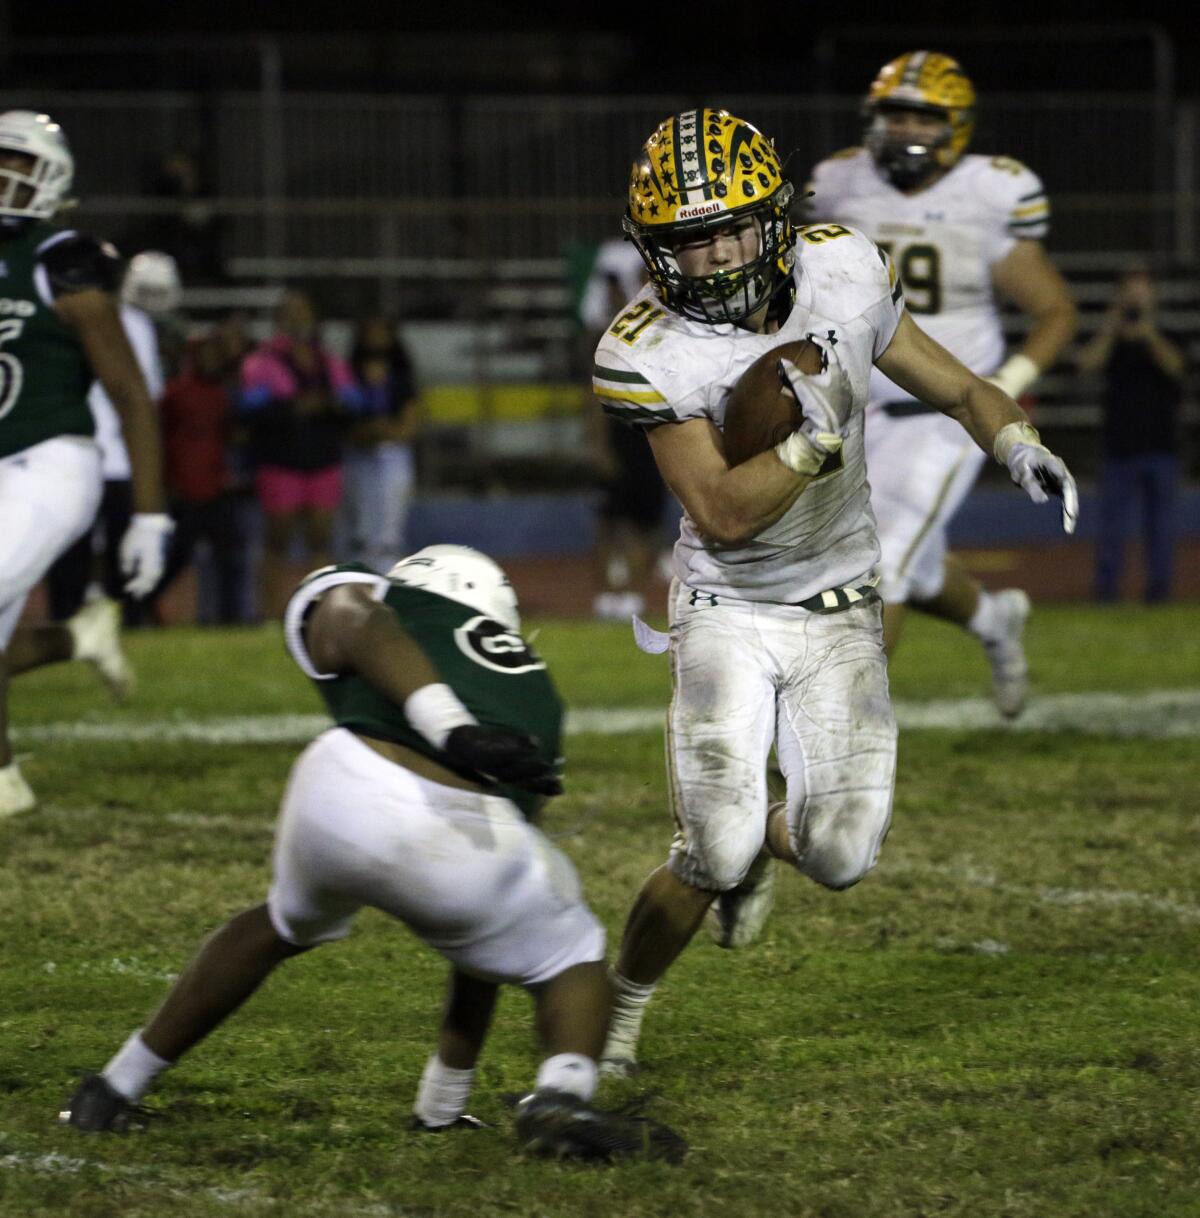 Edison's Troy Fletcher (21) runs around an Inglewood player for a first down in the fourth quarter.